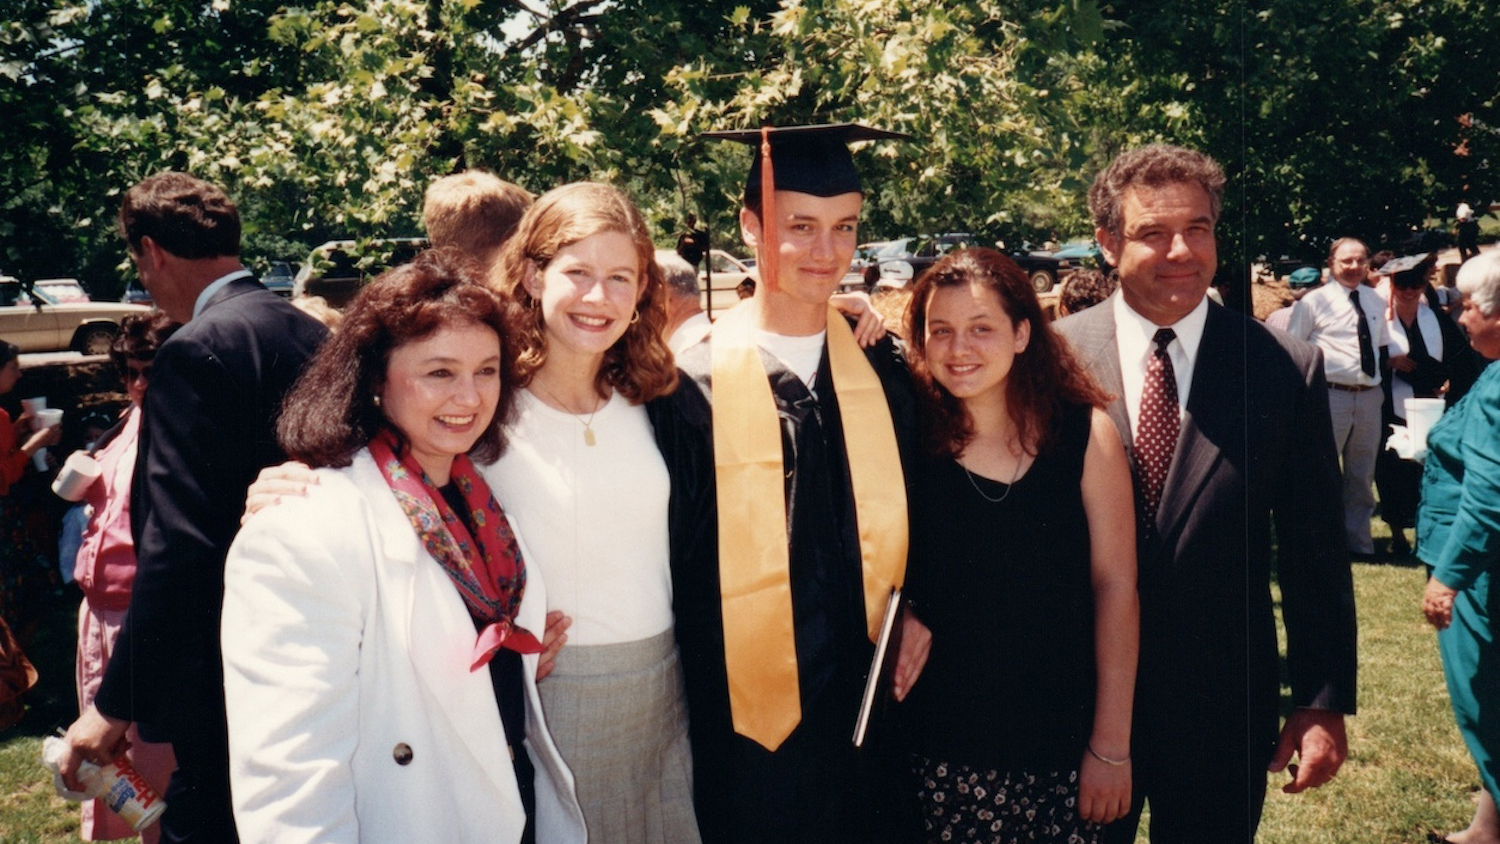 The Clausi family at Nick's 1994 graduation from NC State. Left to right: Karen Clausi (mother), Becky Clausi, Nick Clausi, Gina Braun (sister), Tom Clausi.